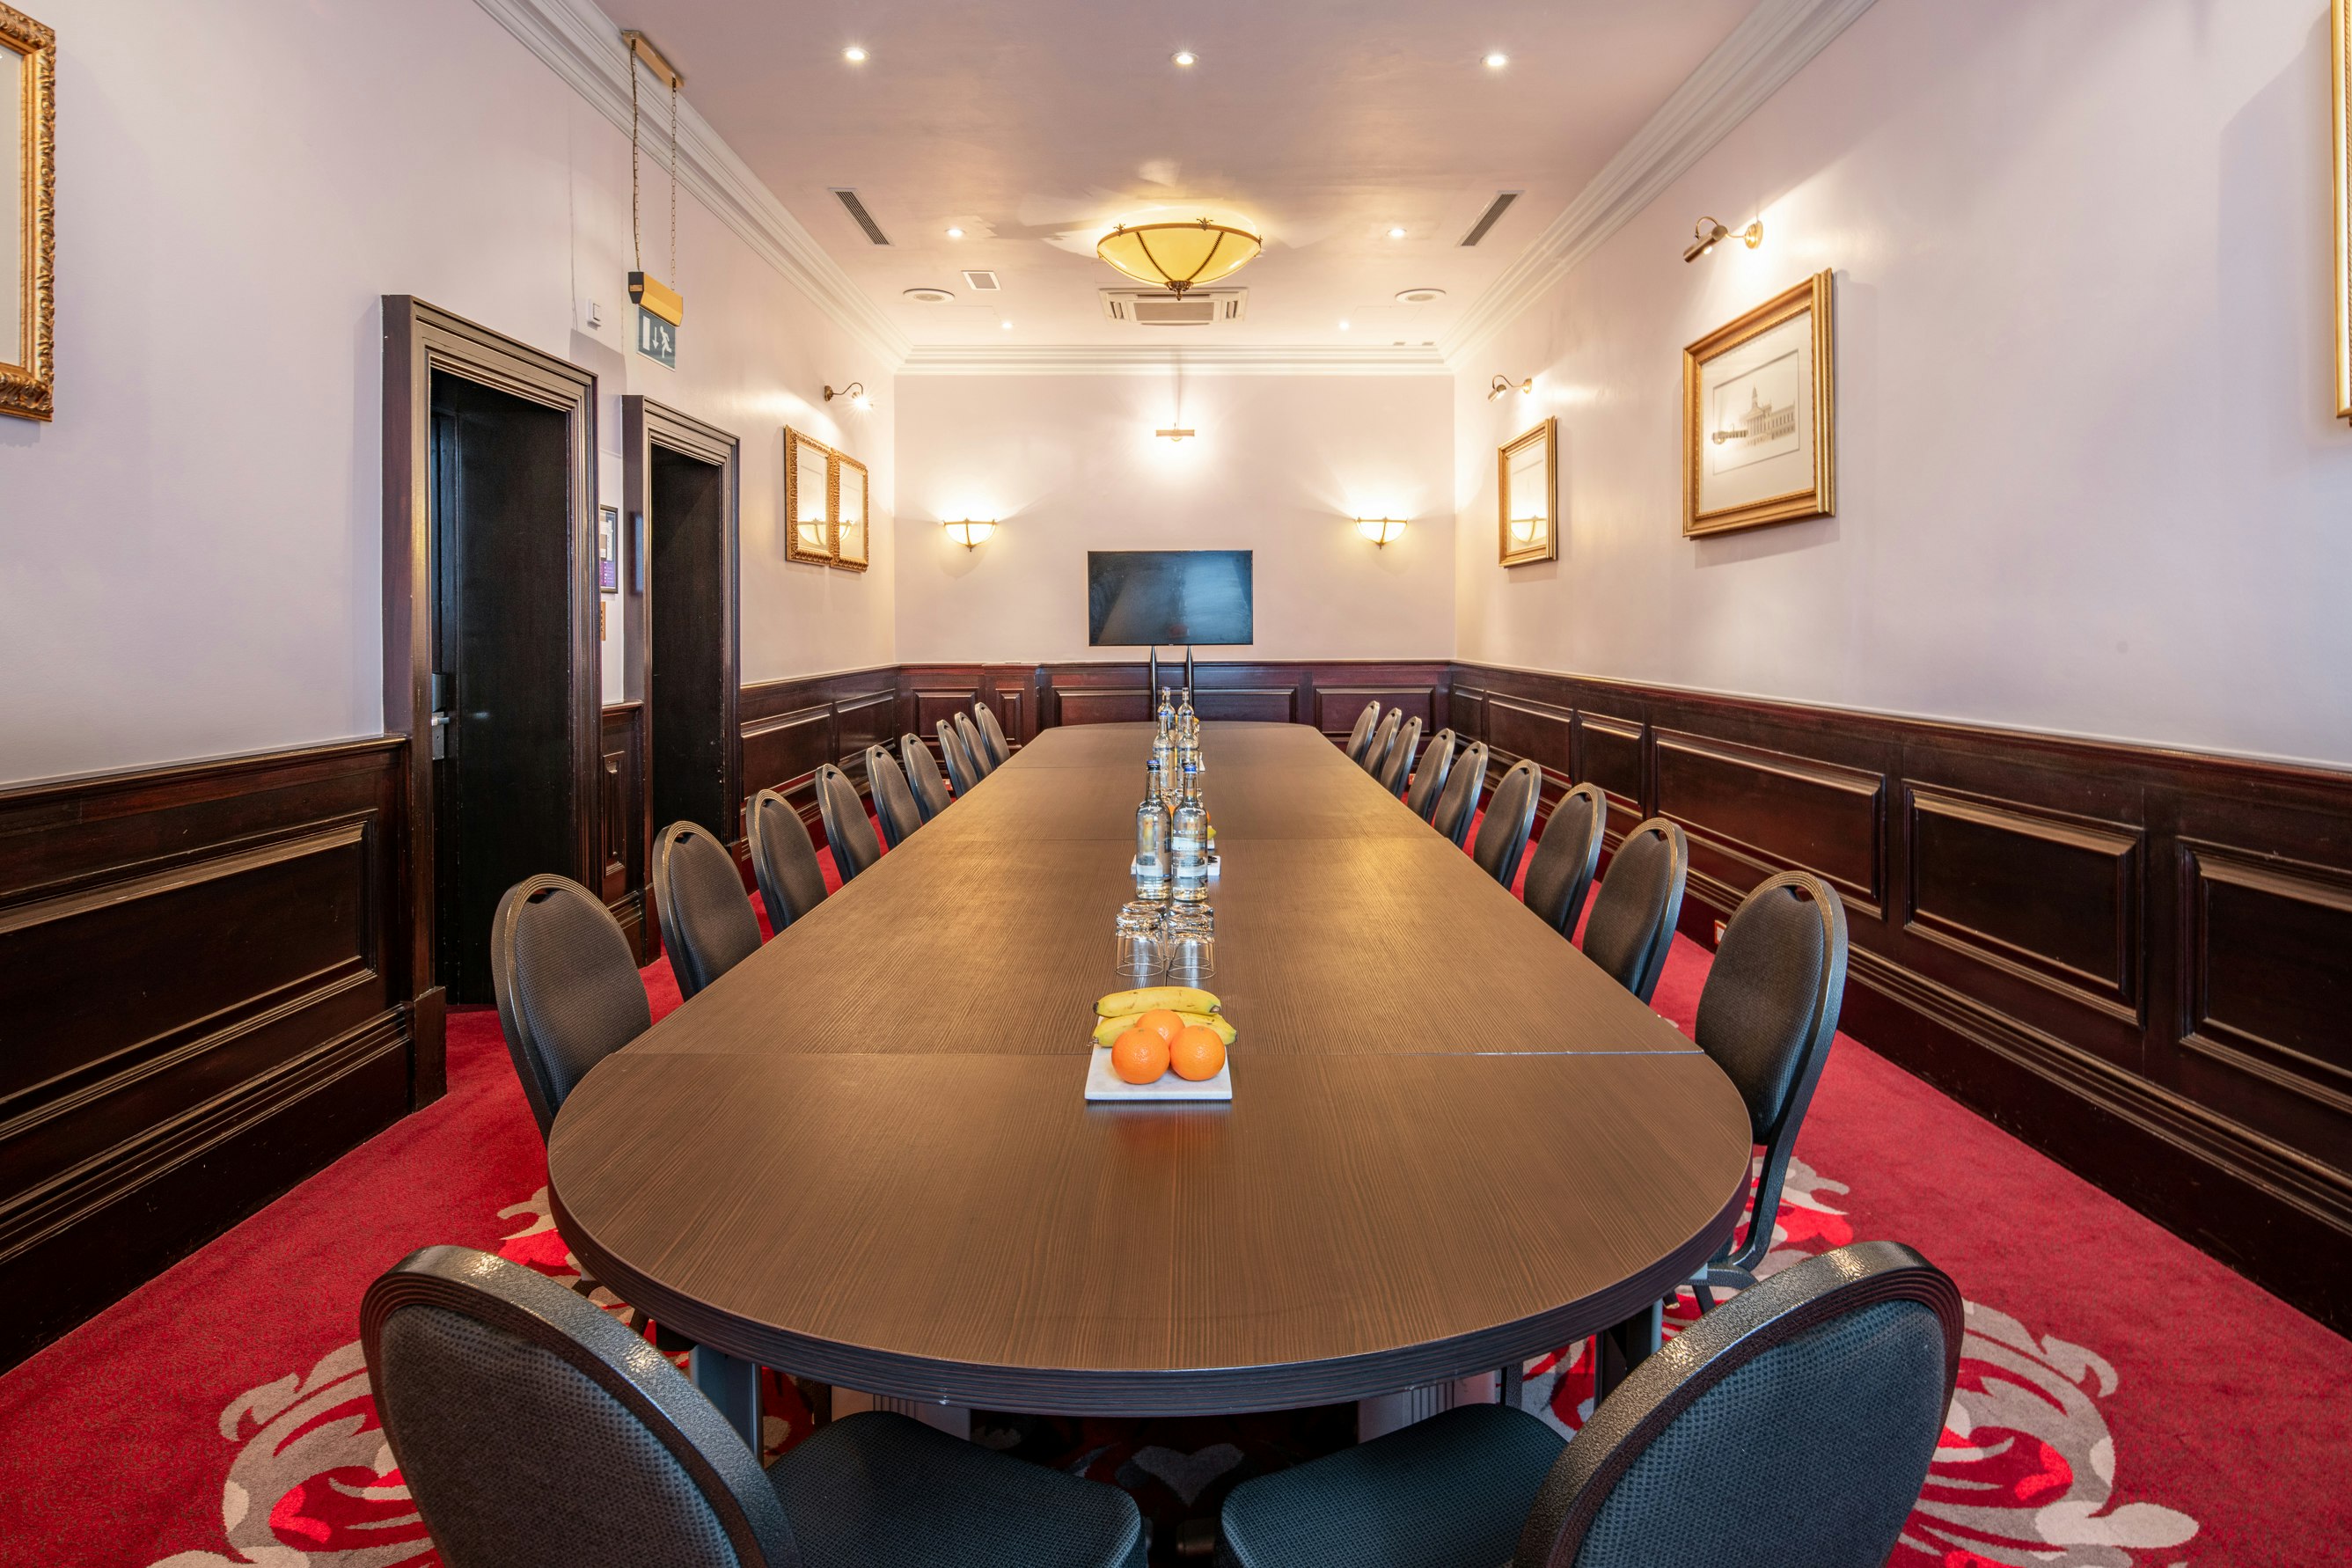 The Clermont Charing Cross - Boardroom image 2